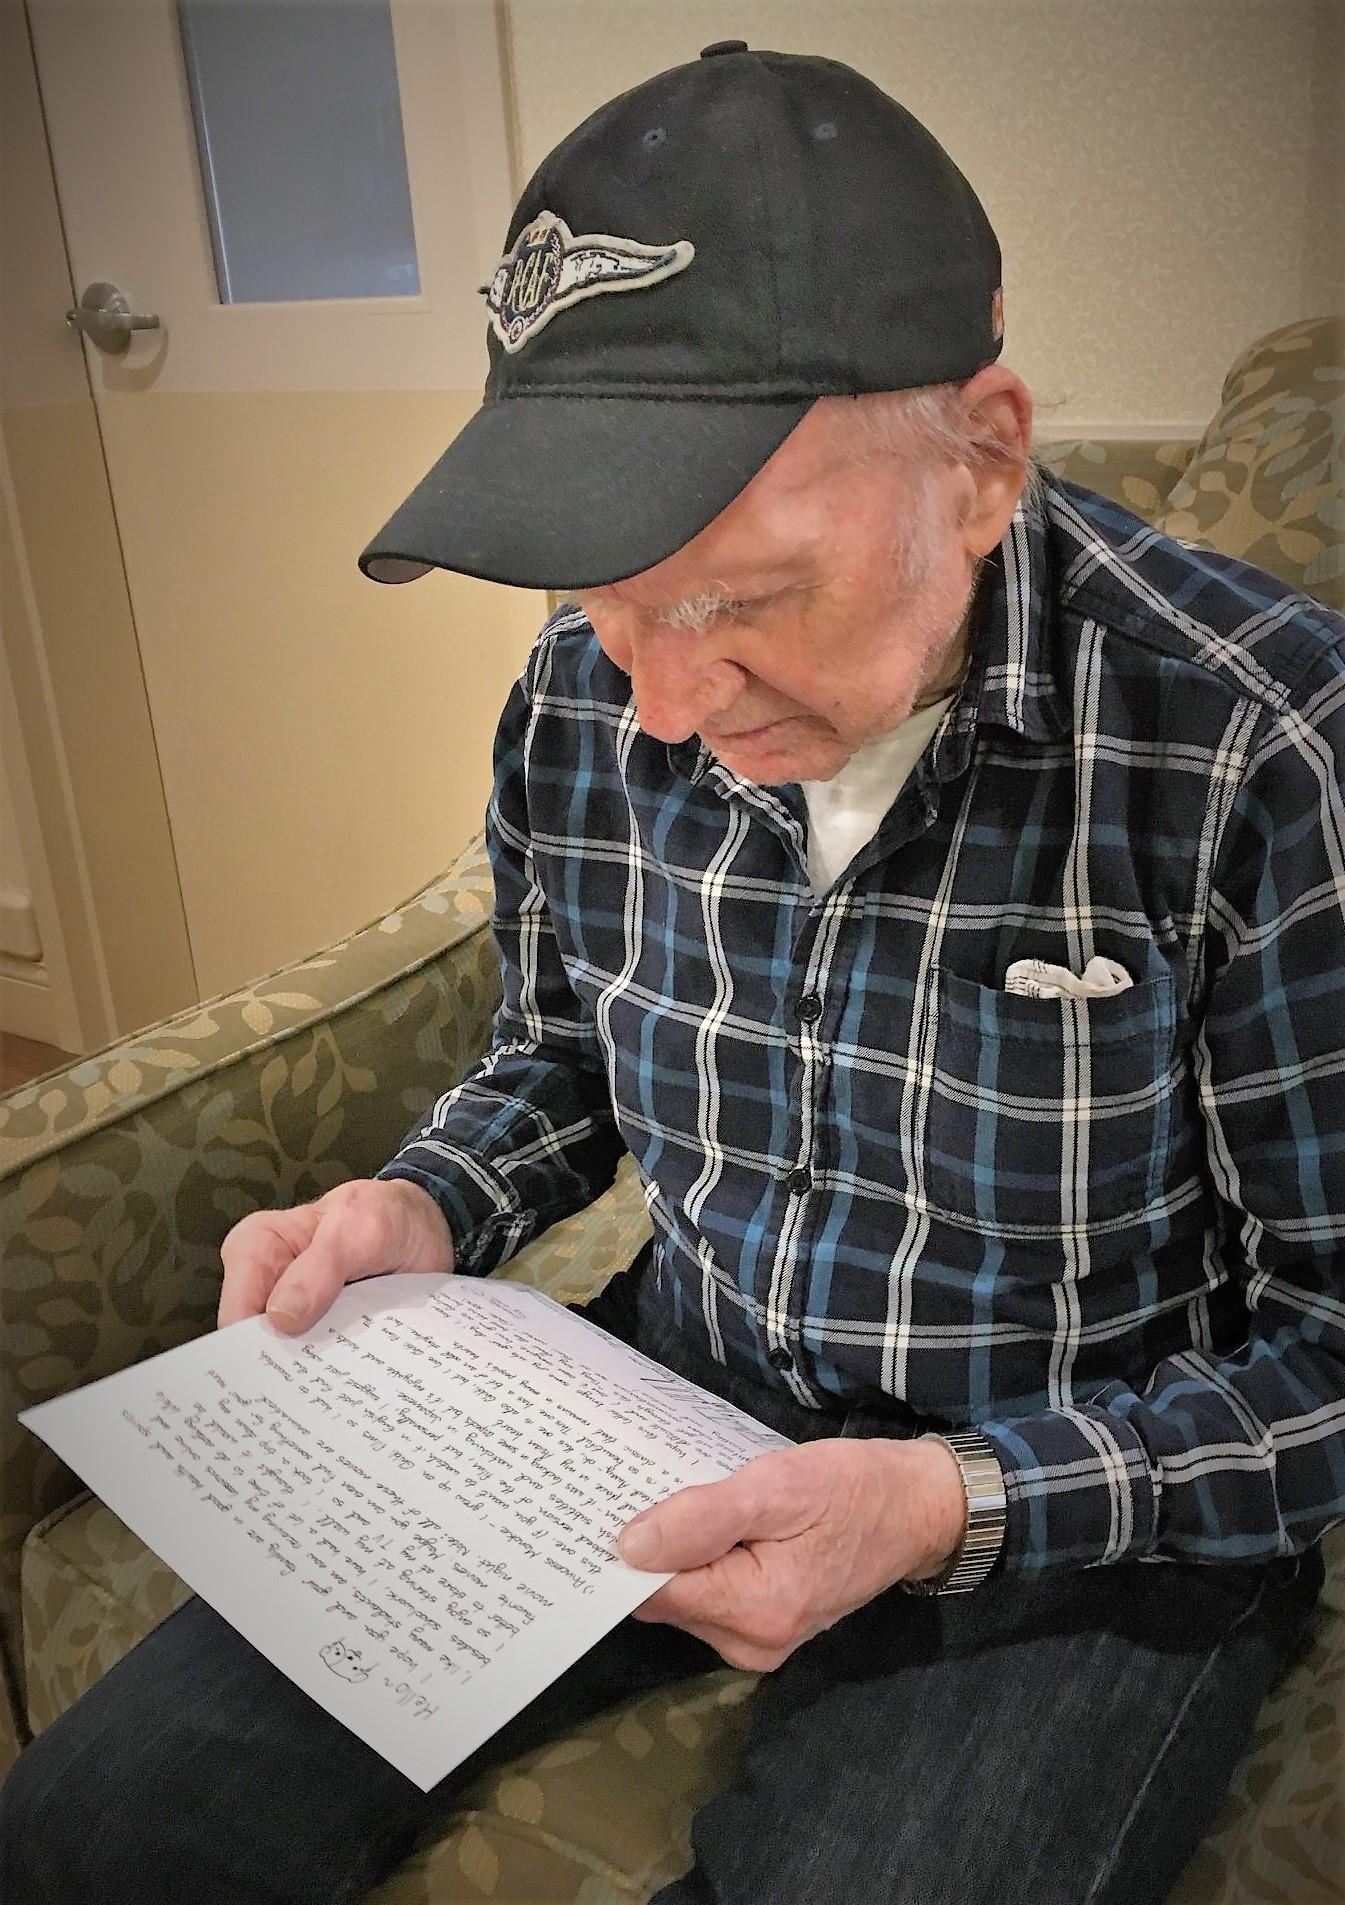 Old man wearing a baseball cap and plaid shirt sitting in a chair reading a letter